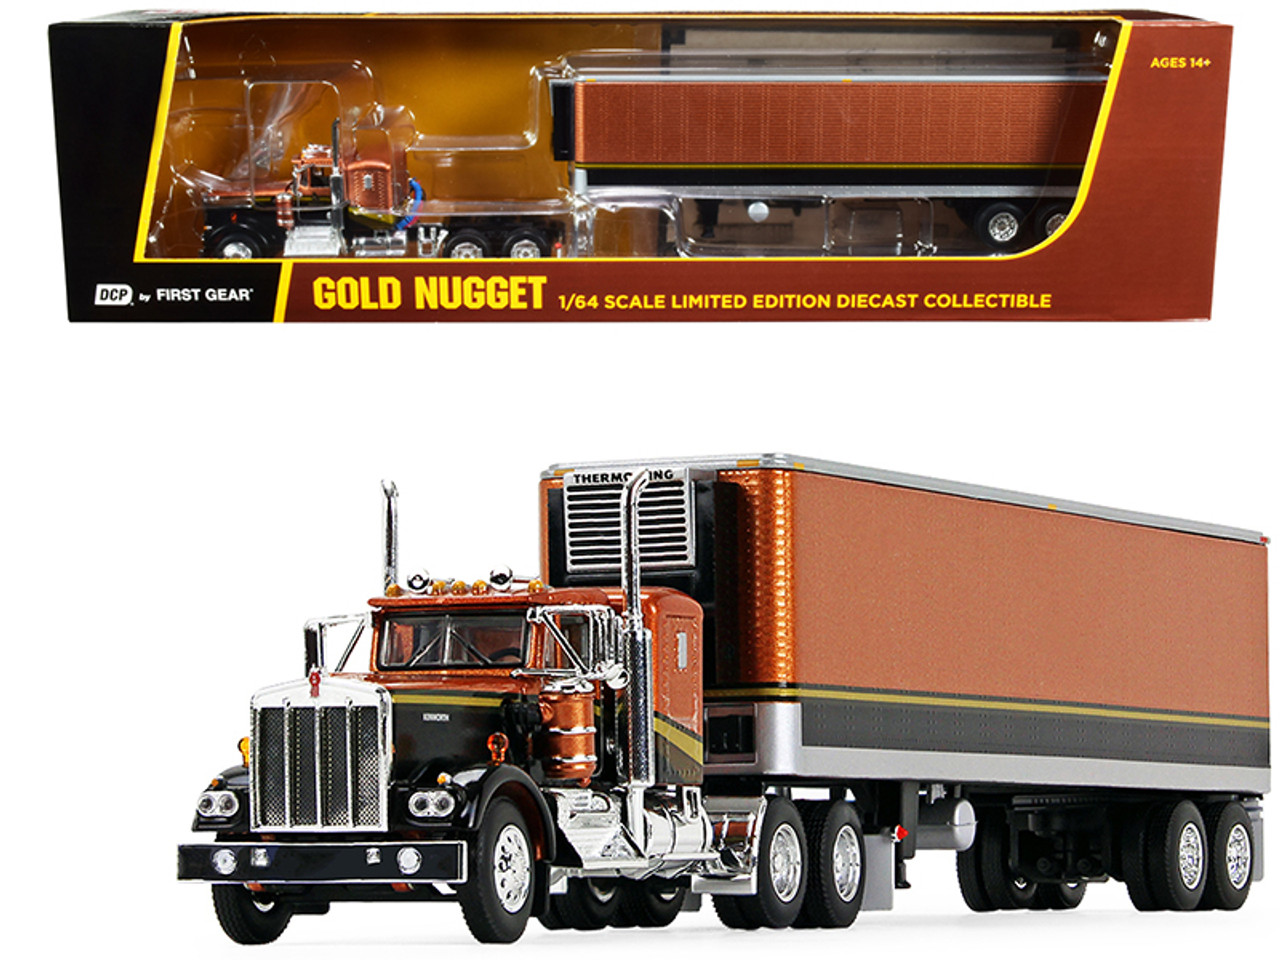 Kenworth W900A with 36" Flattop Sleeper Cab and 40' Vintage Refrigerated Reefer Trailer "Gold Nugget" Gold and Black 1/64 Diecast Model by DCP/First Gear